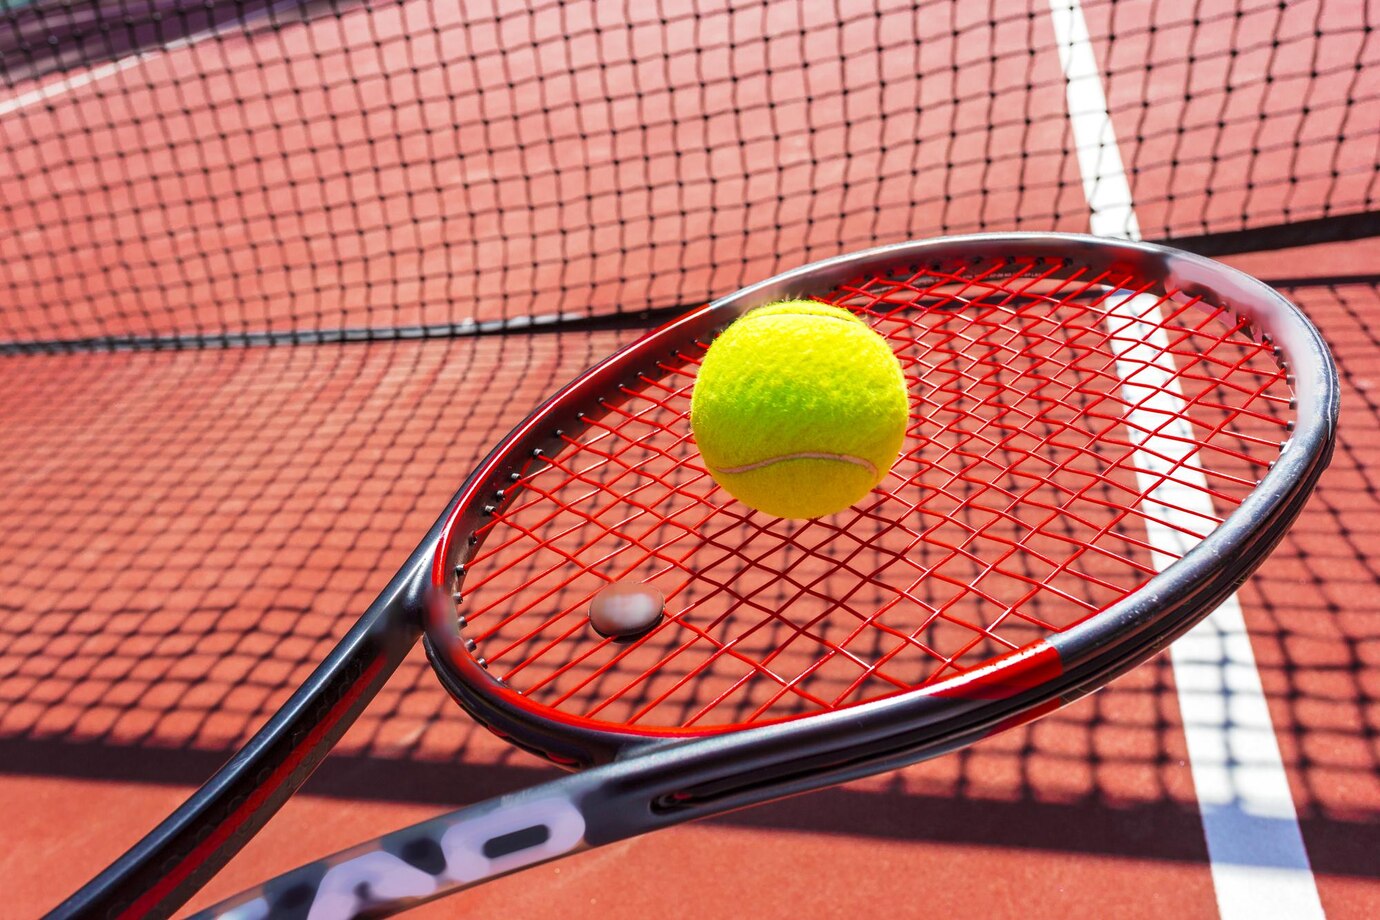 Tennis betting: selection of tournaments and tennis players